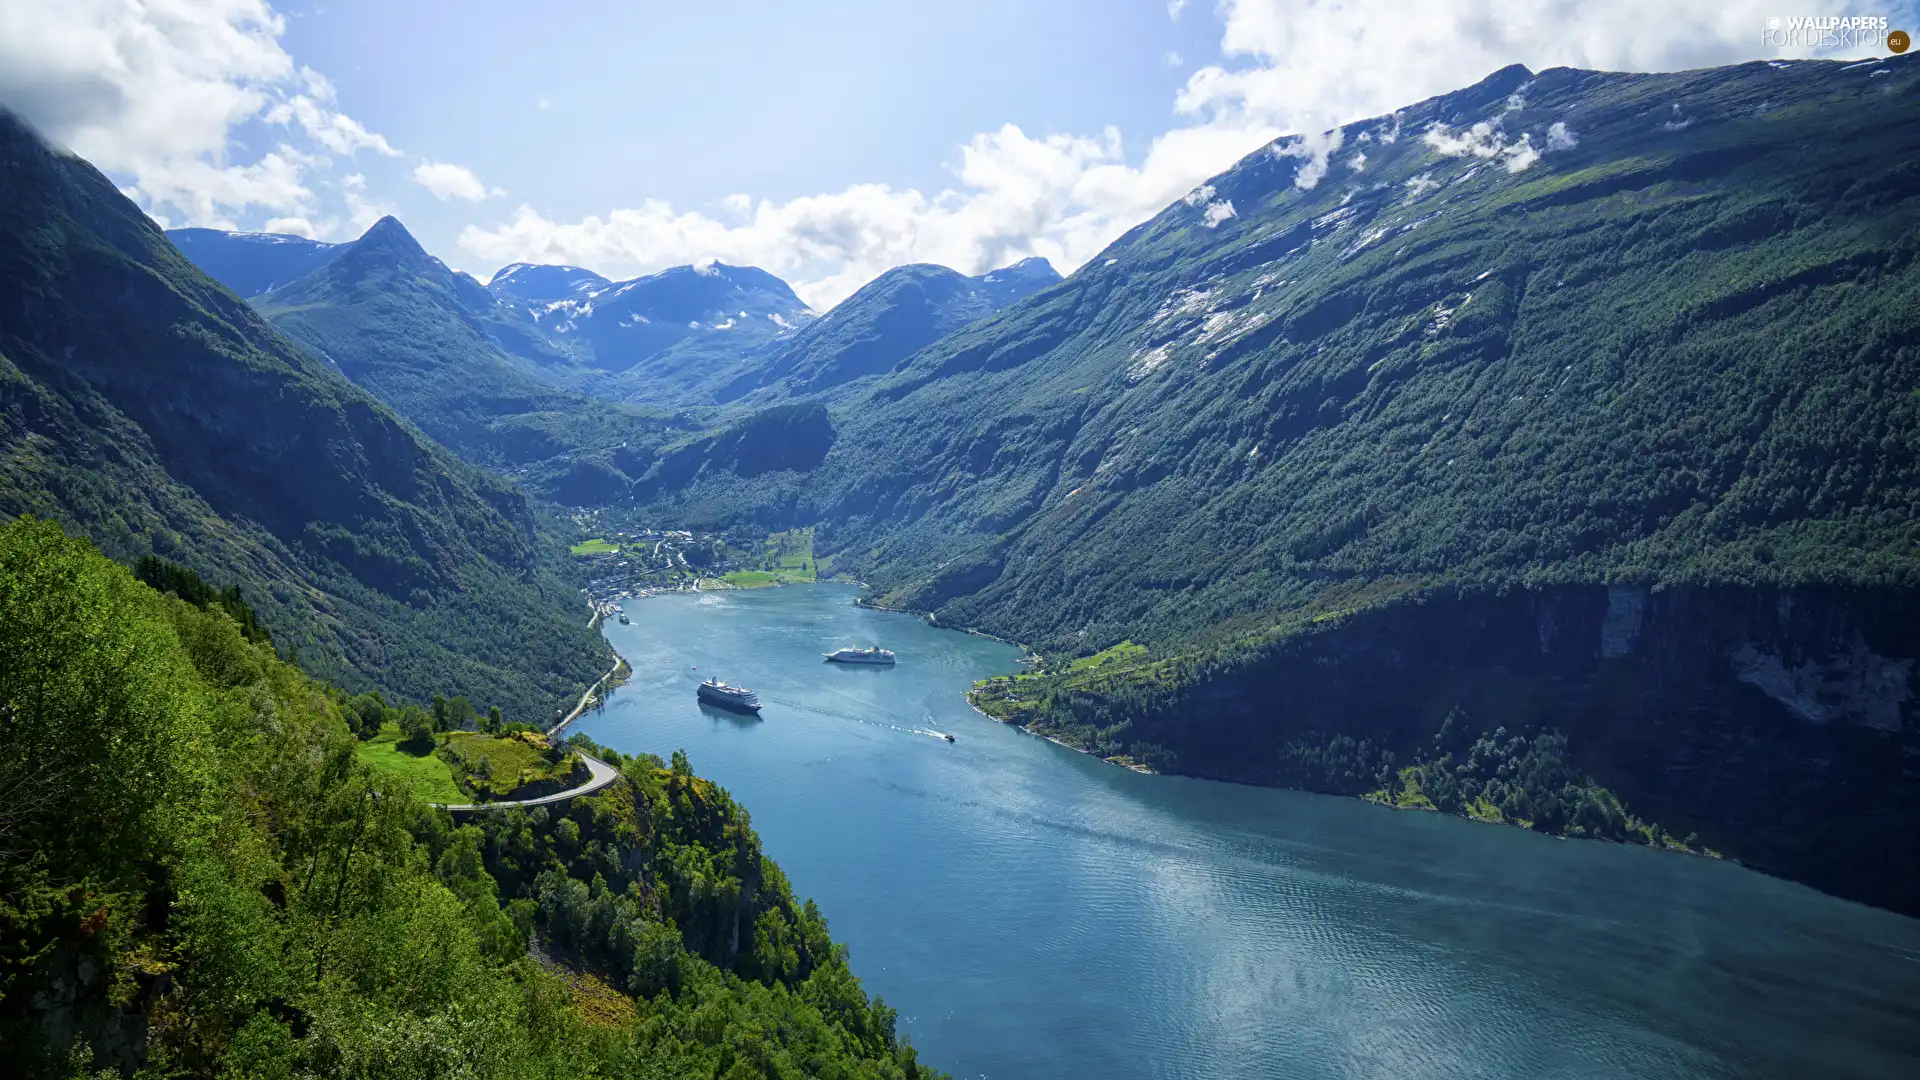 woods, Fiord Geirangerfjorden, viewes, vessels, Mountains, trees, Norway